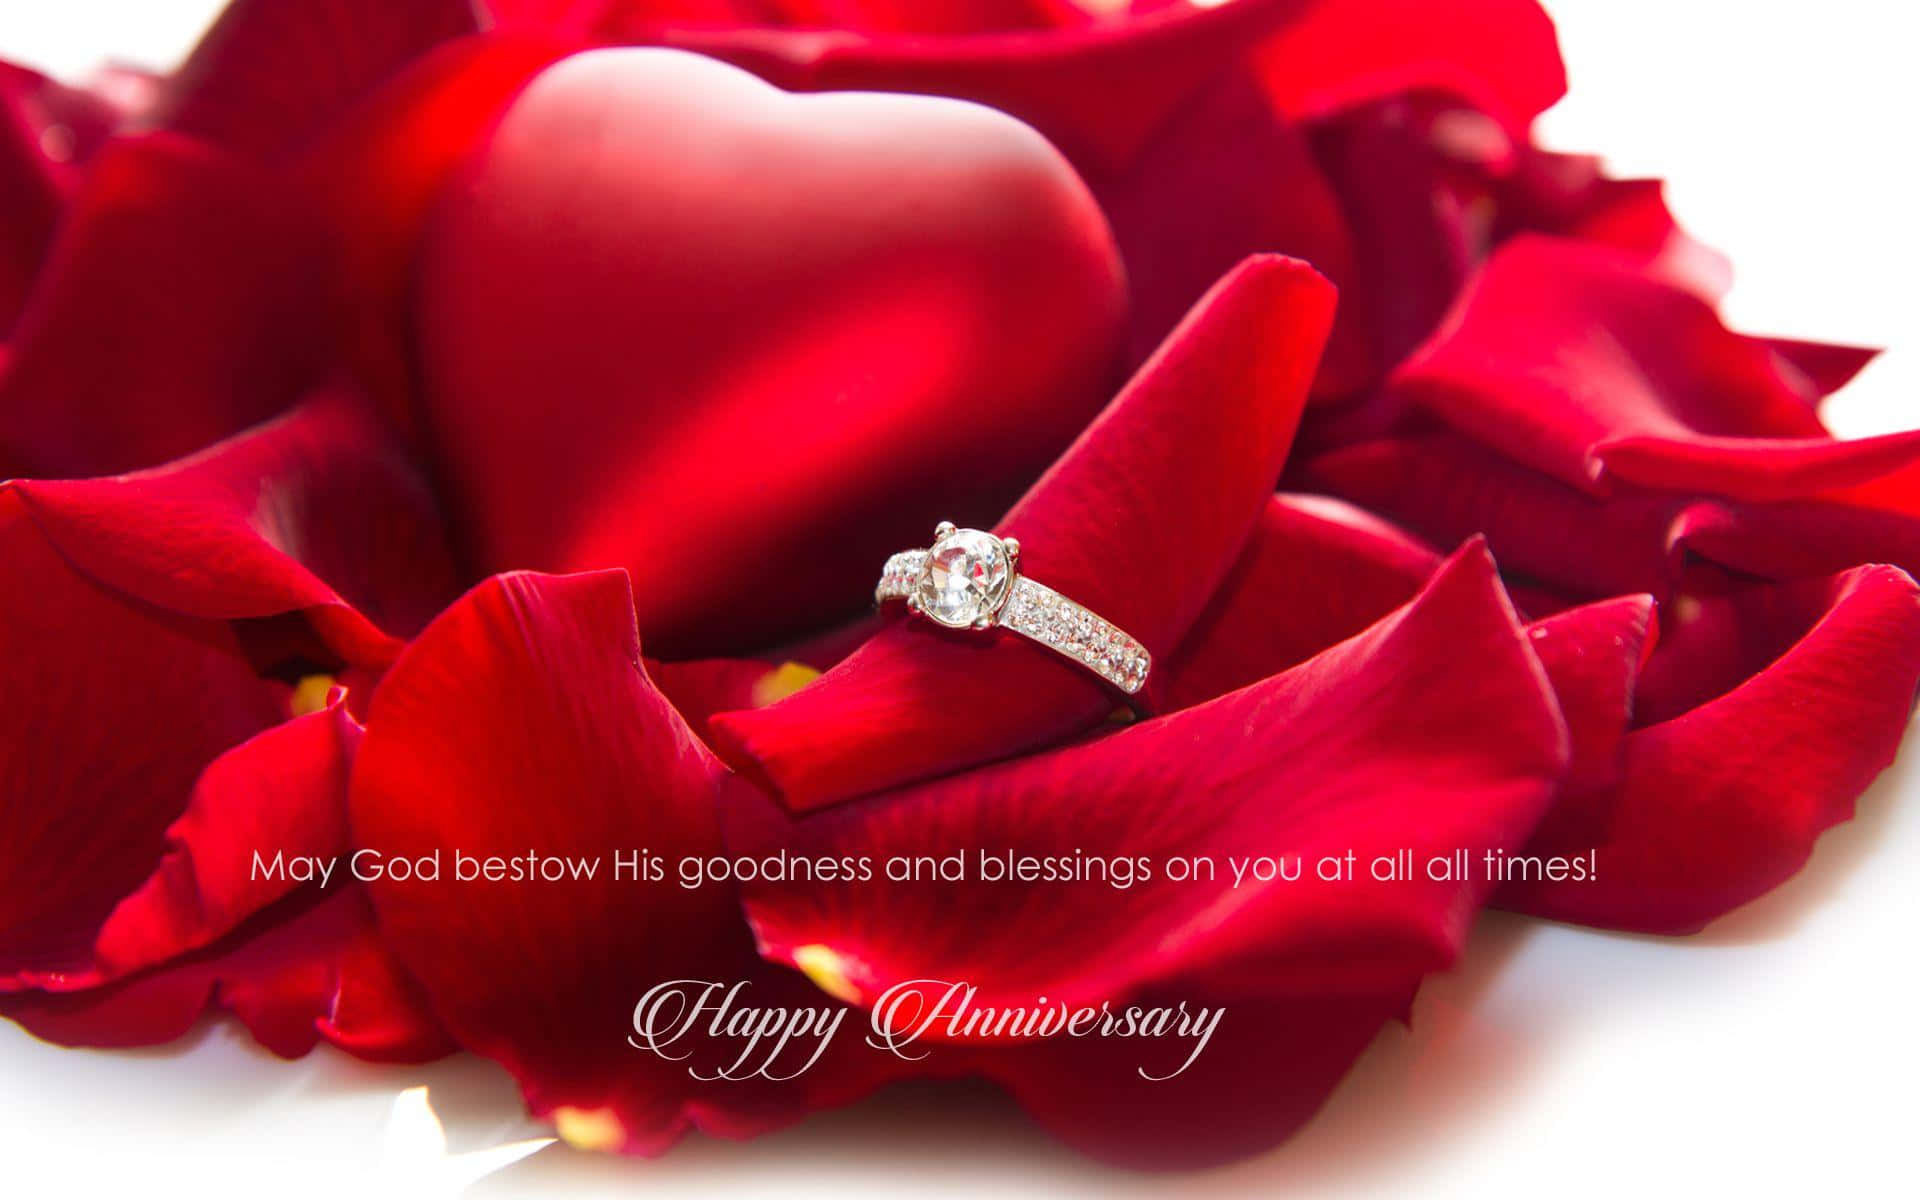 Wishing a very happy anniversary&a lifetime of love&happiness!